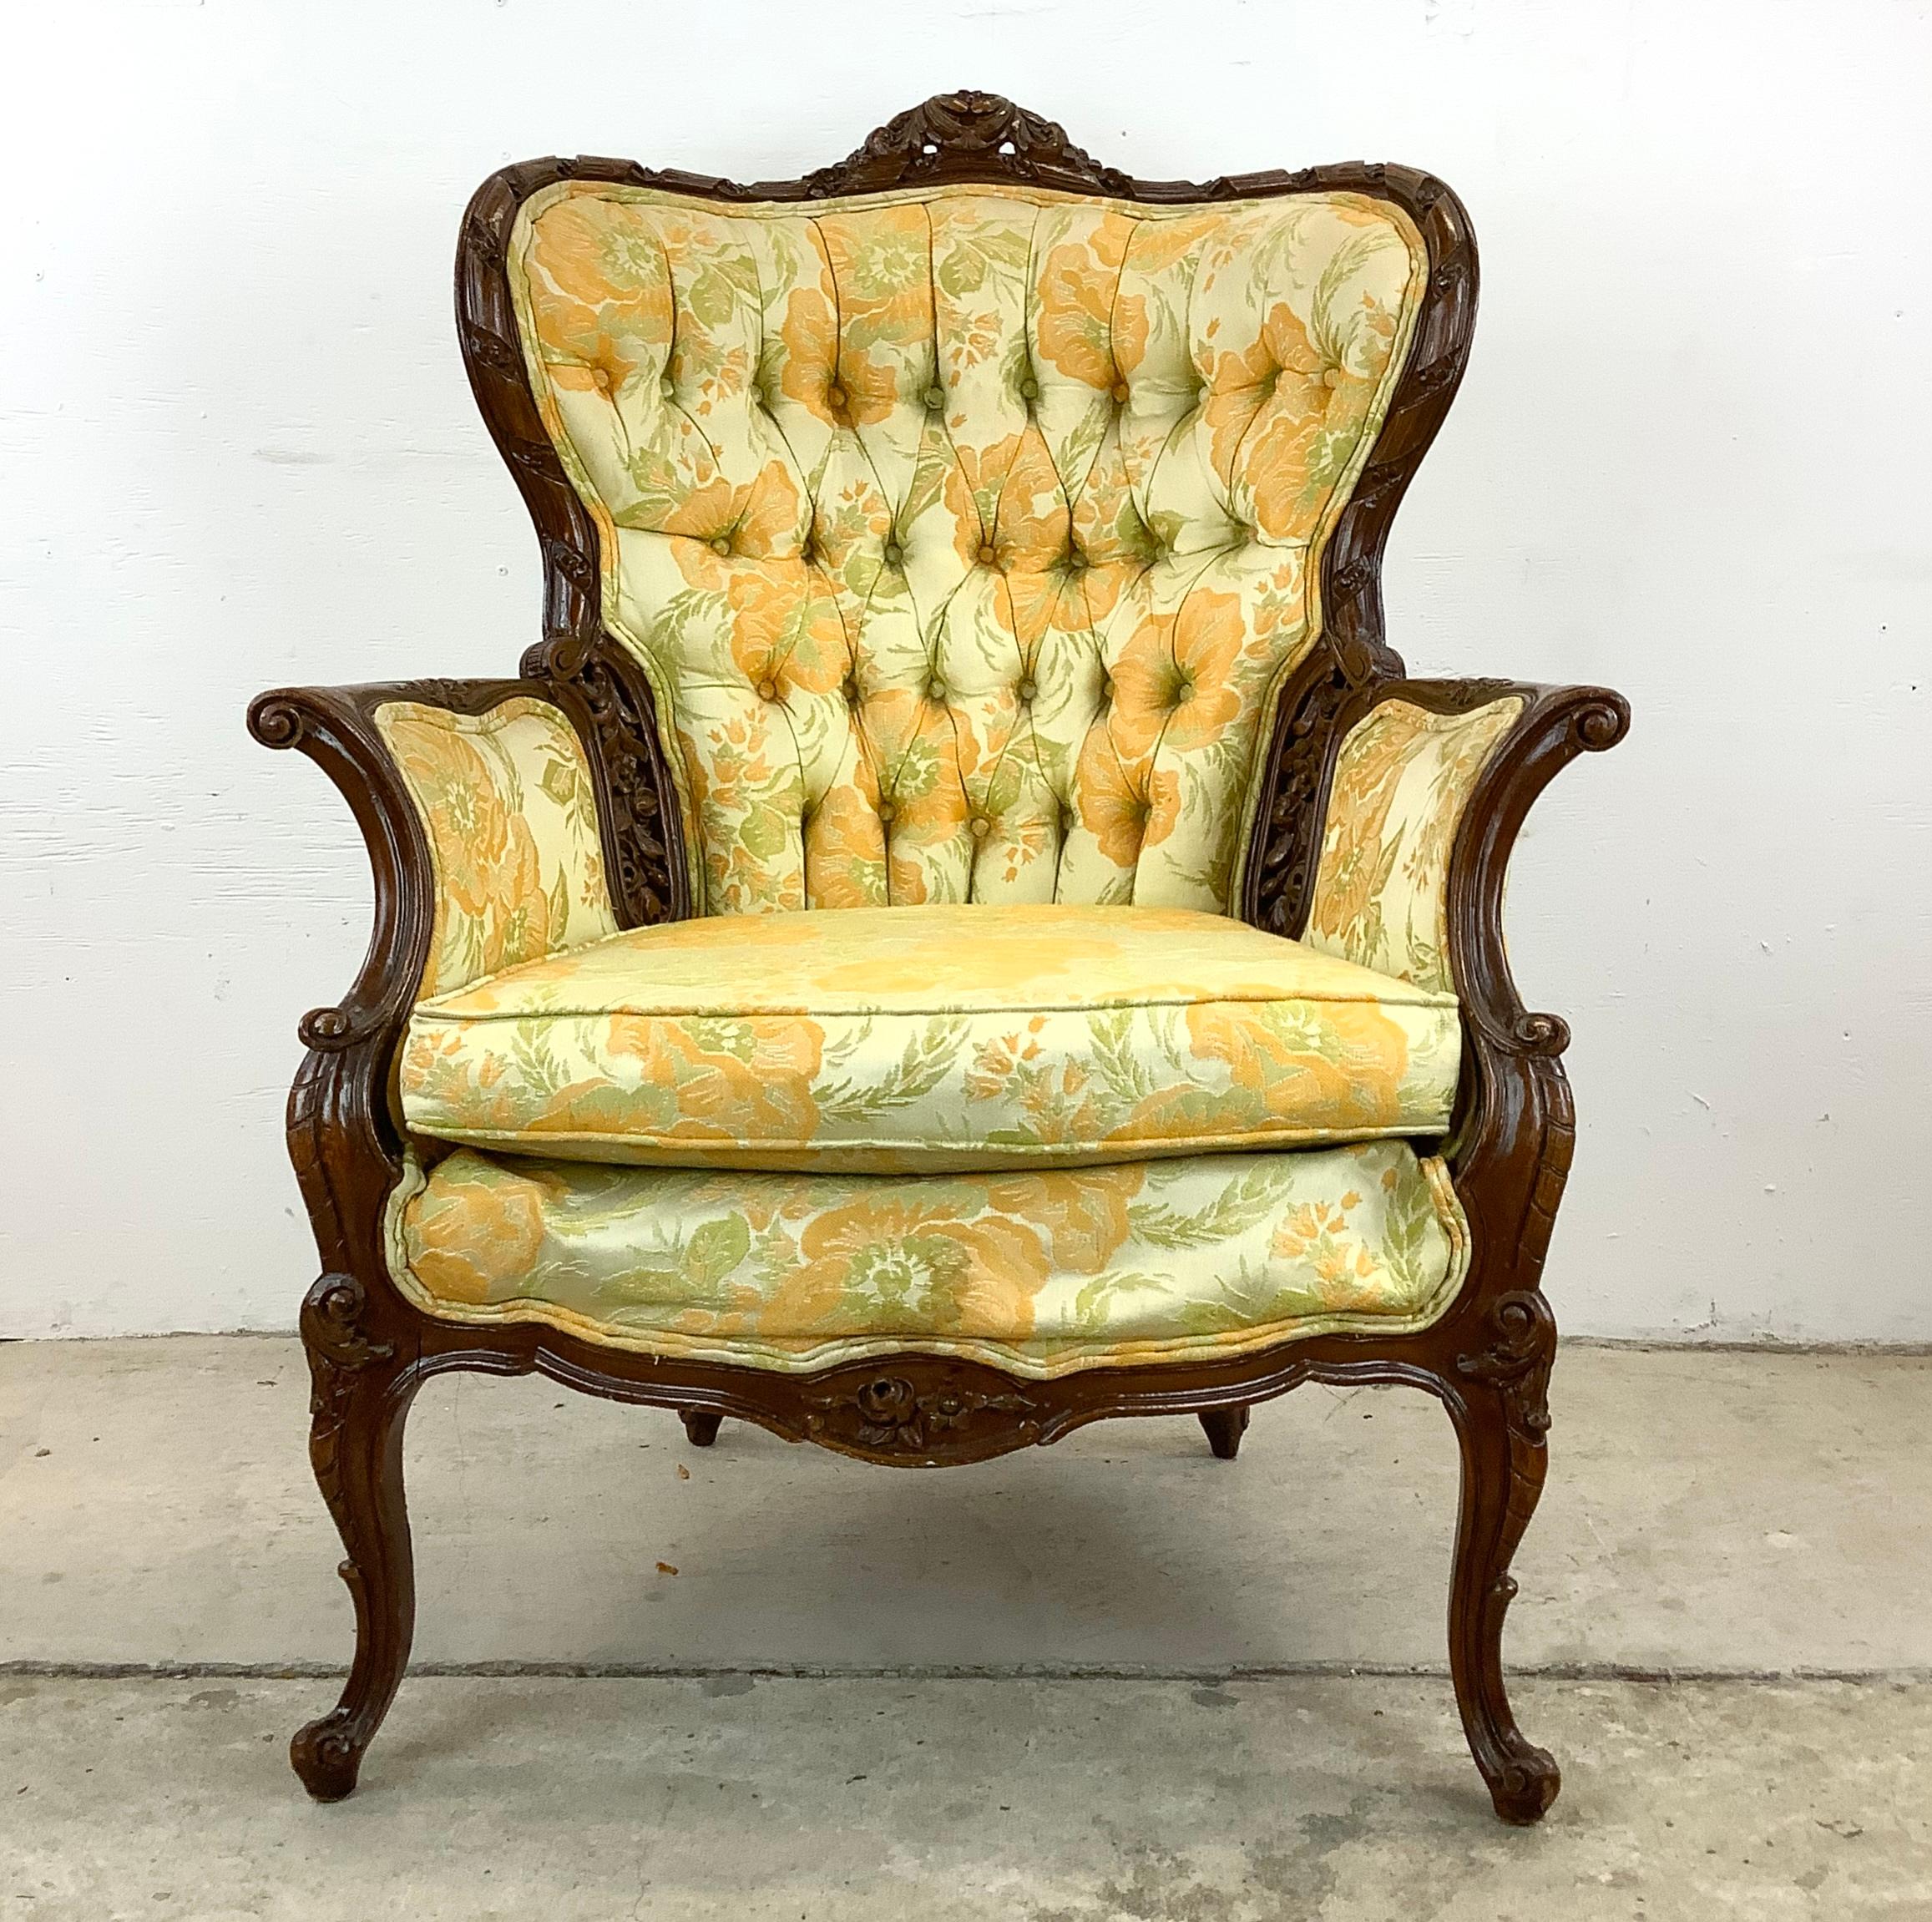 Nestle into the grandeur of yesteryear with this Louis XV-style wing chair, a luxurious ode to early 20th-century craftsmanship. This wing chair, with its solid wood frame and intricate carvings, showcases the opulent design of the era, adding a